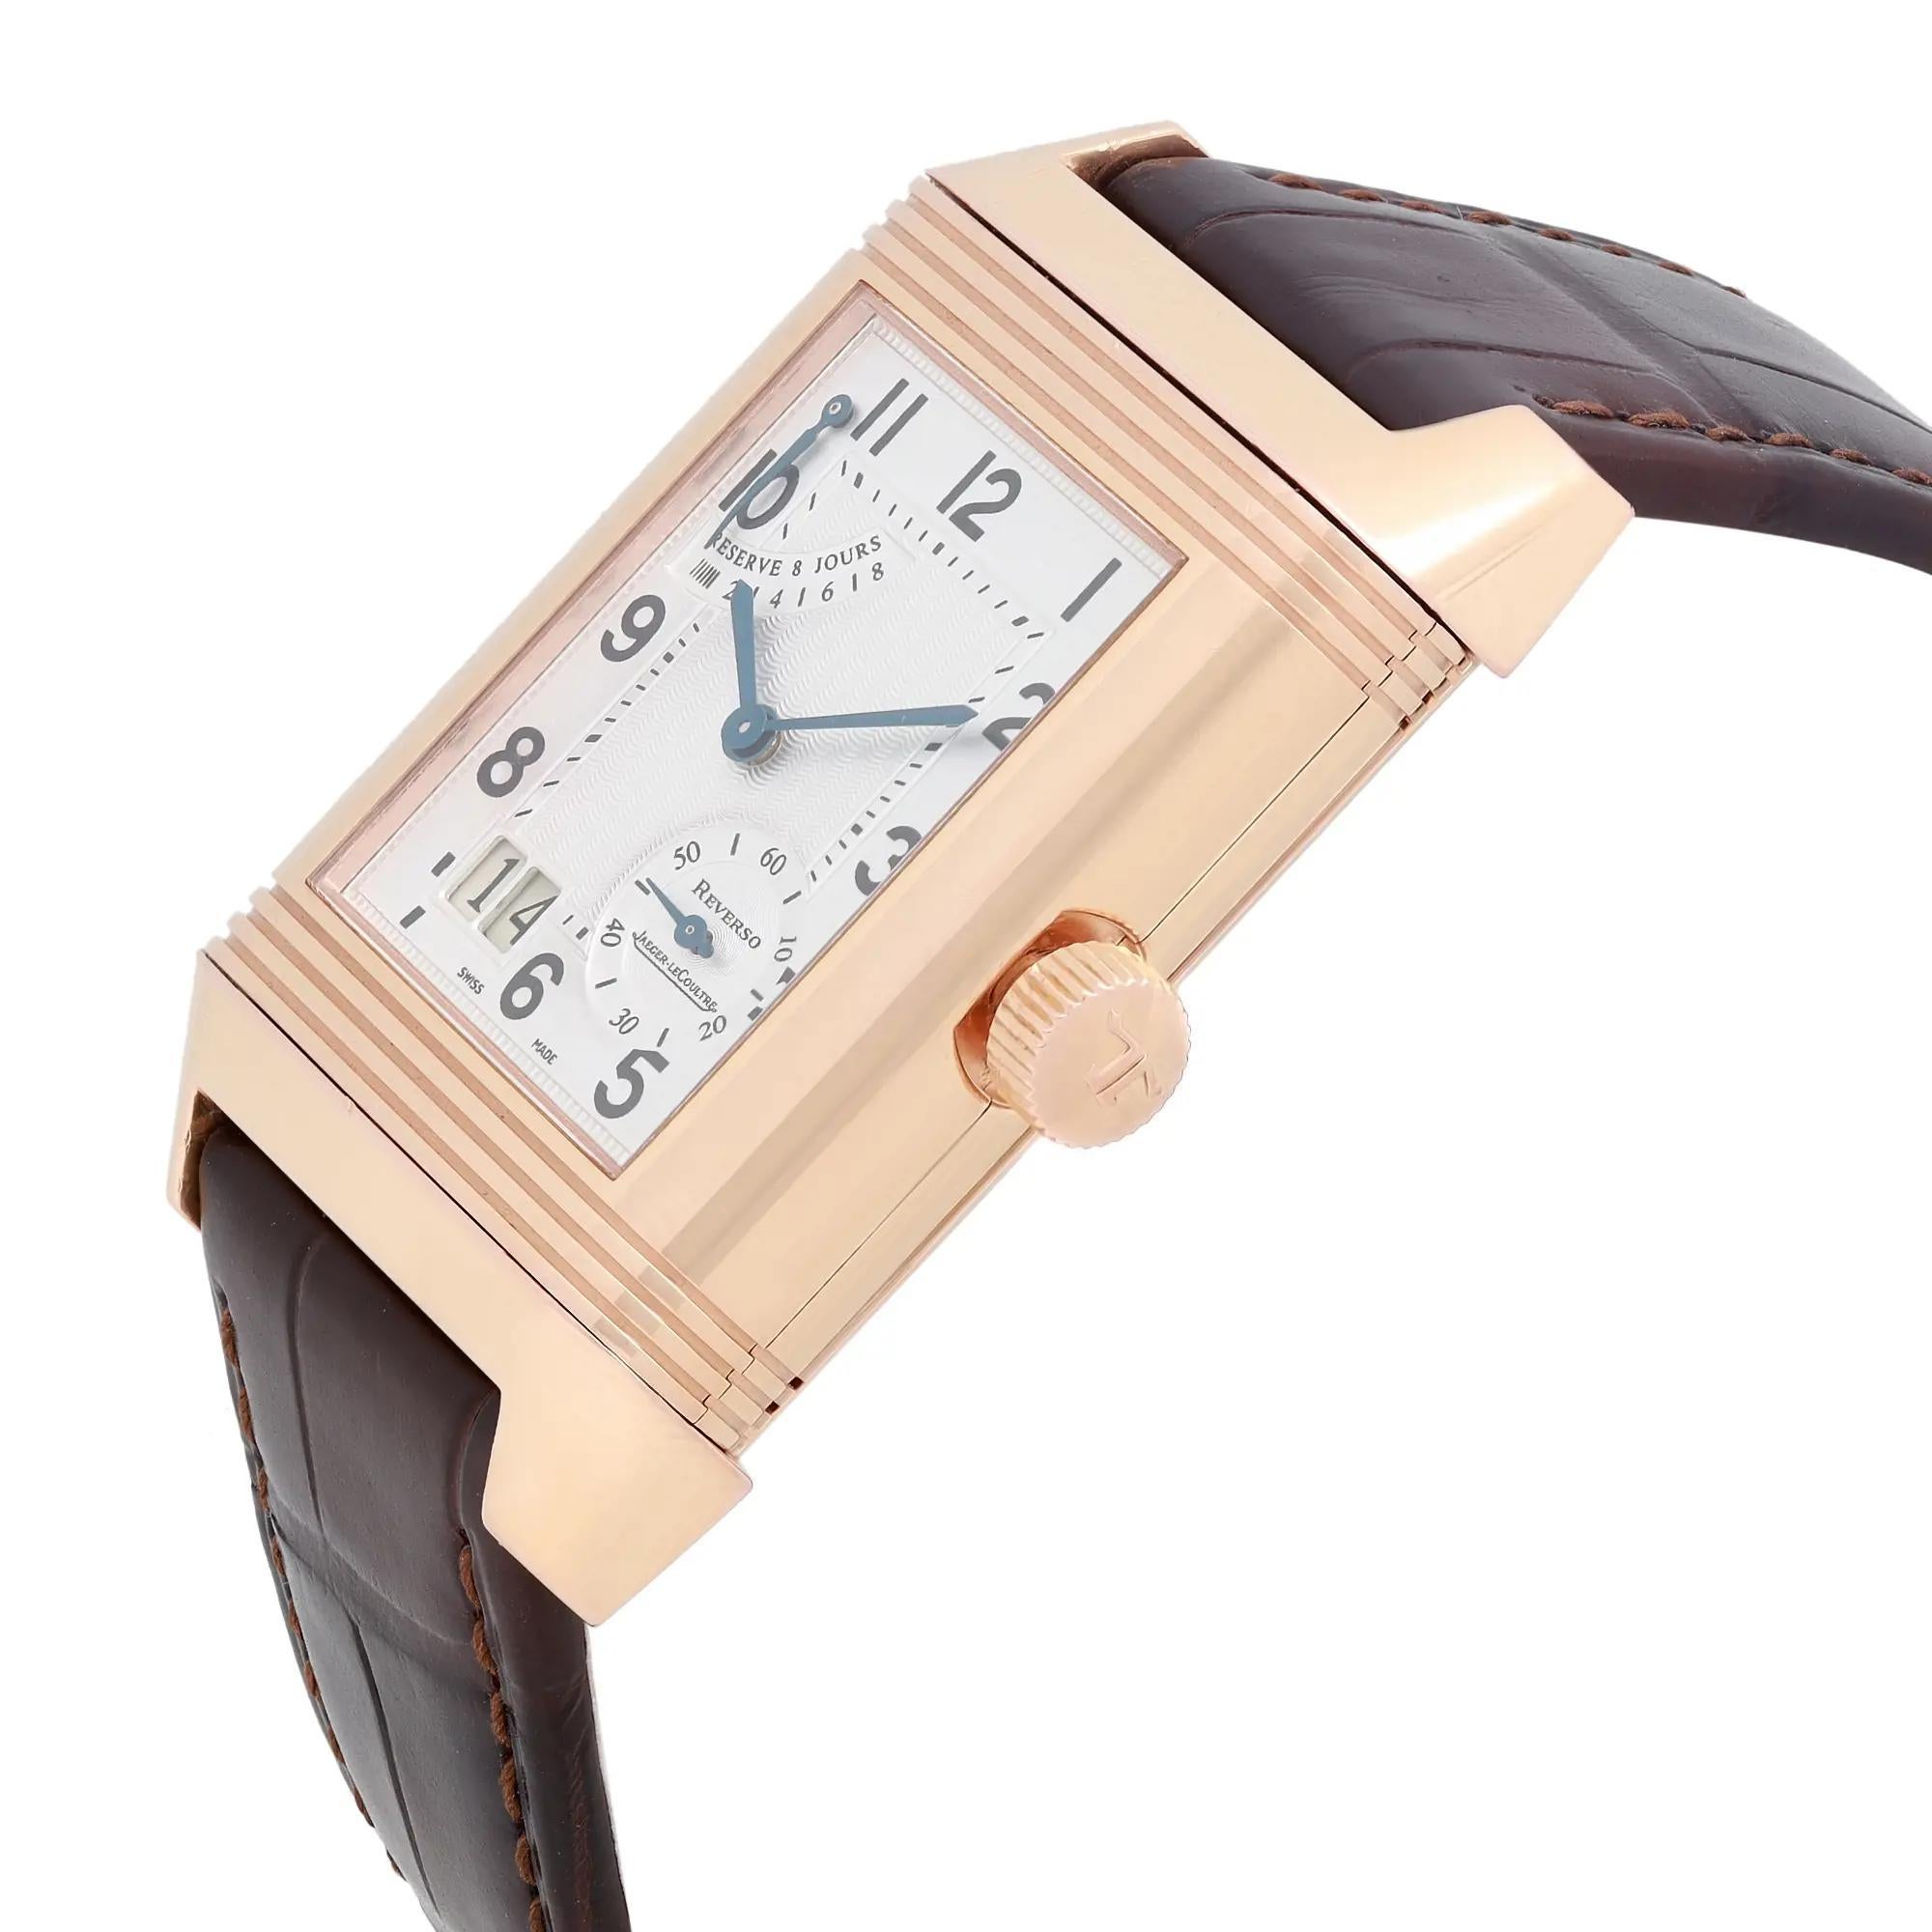 Jaeger-LeCoultre Reverso Grande 18k Rose Gold Silver Dial Watch Q300240 In Excellent Condition For Sale In New York, NY